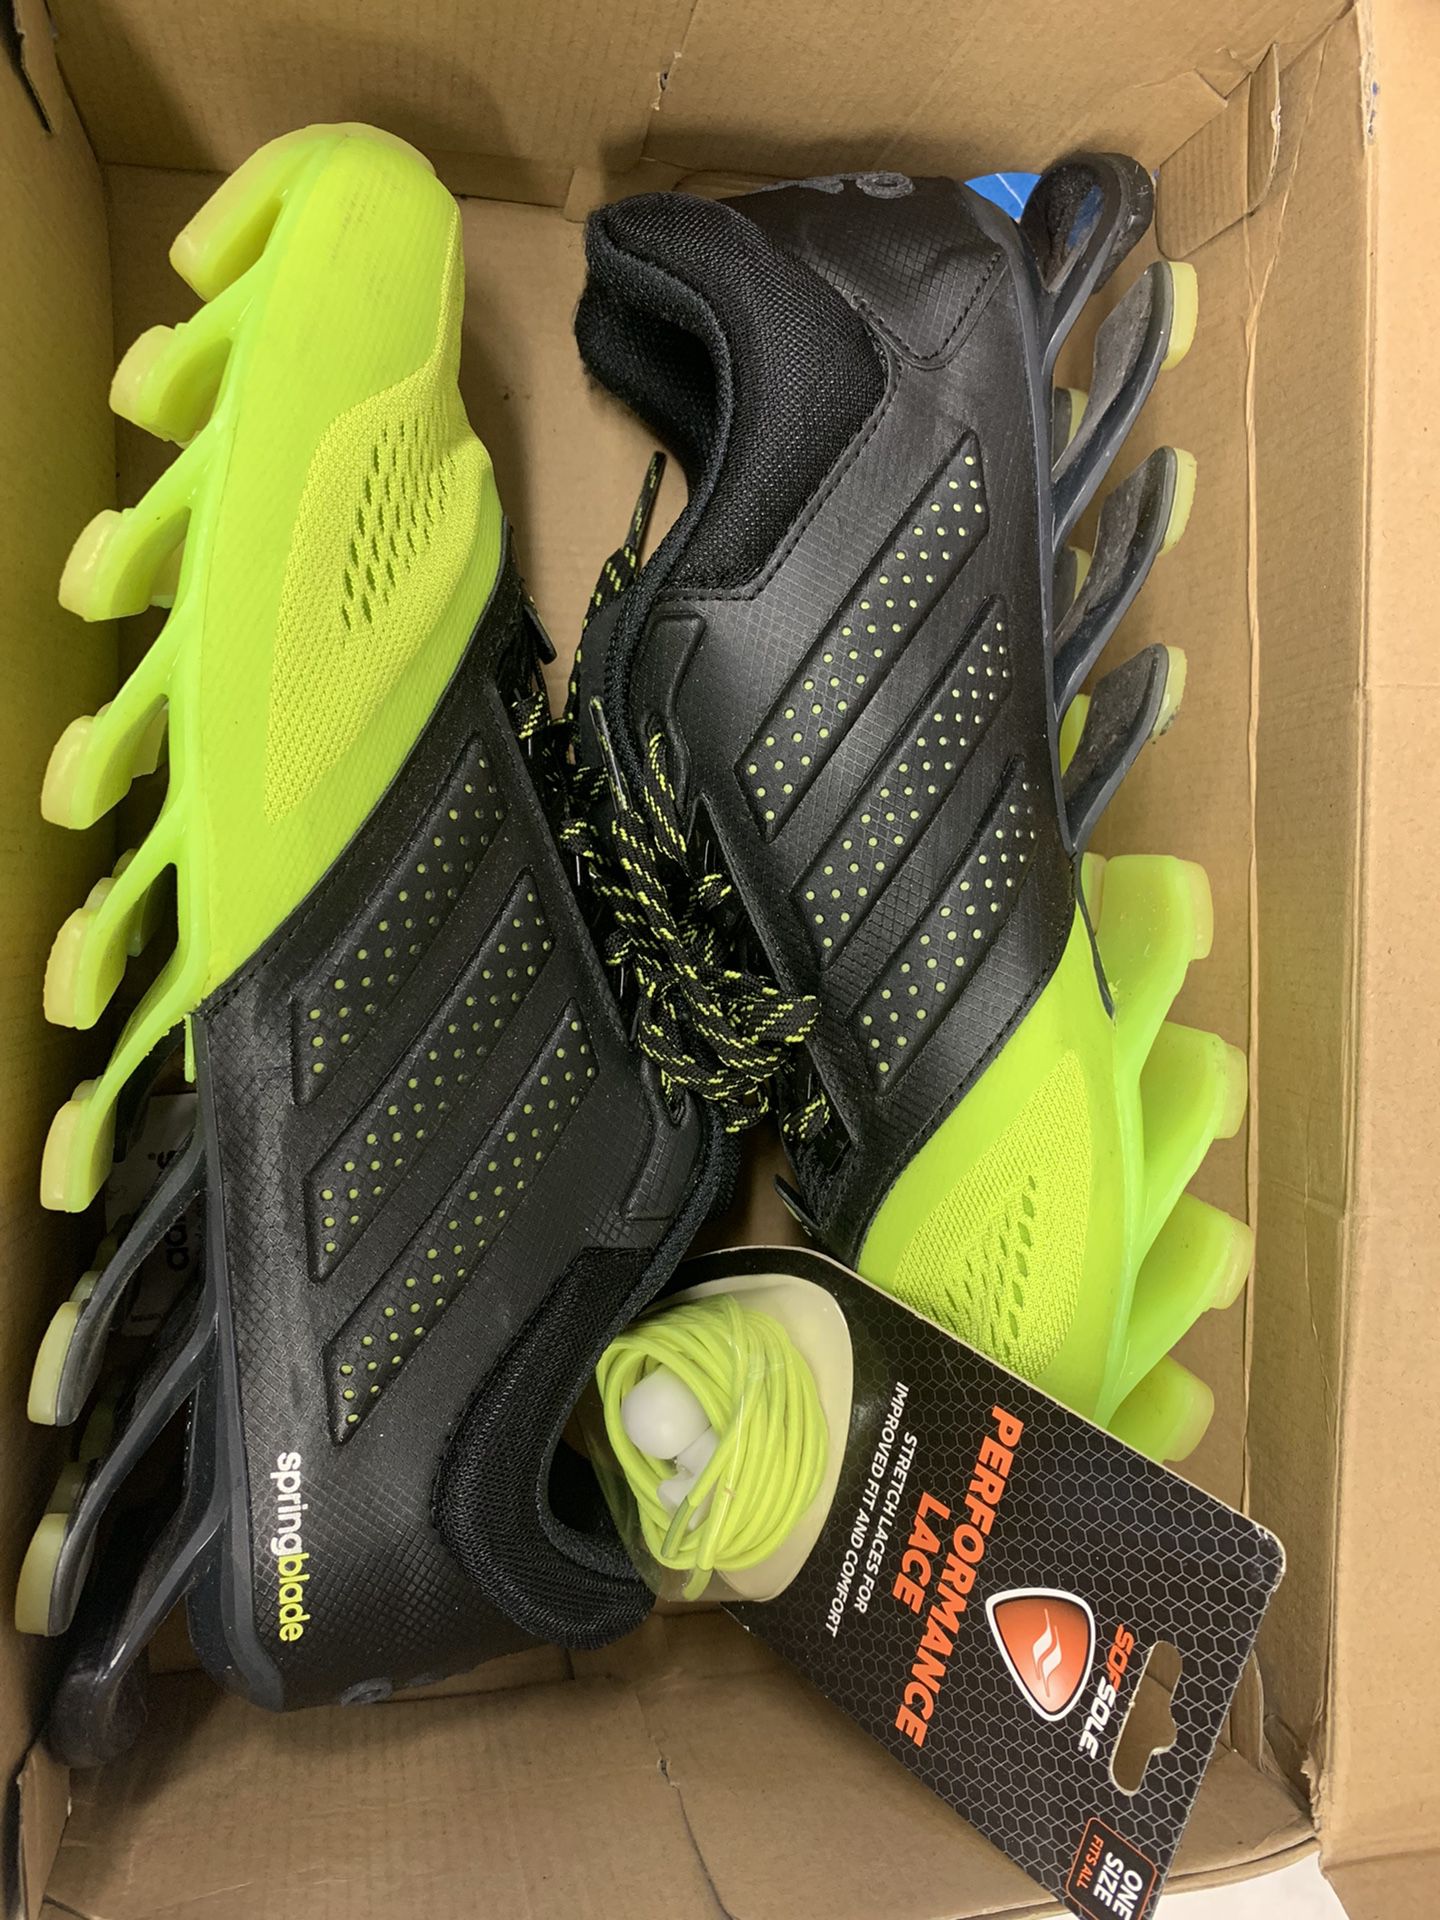 Adidas Springblade Drive Running Sneaker Shoes NEW for Sale in Pompano Beach, FL - OfferUp